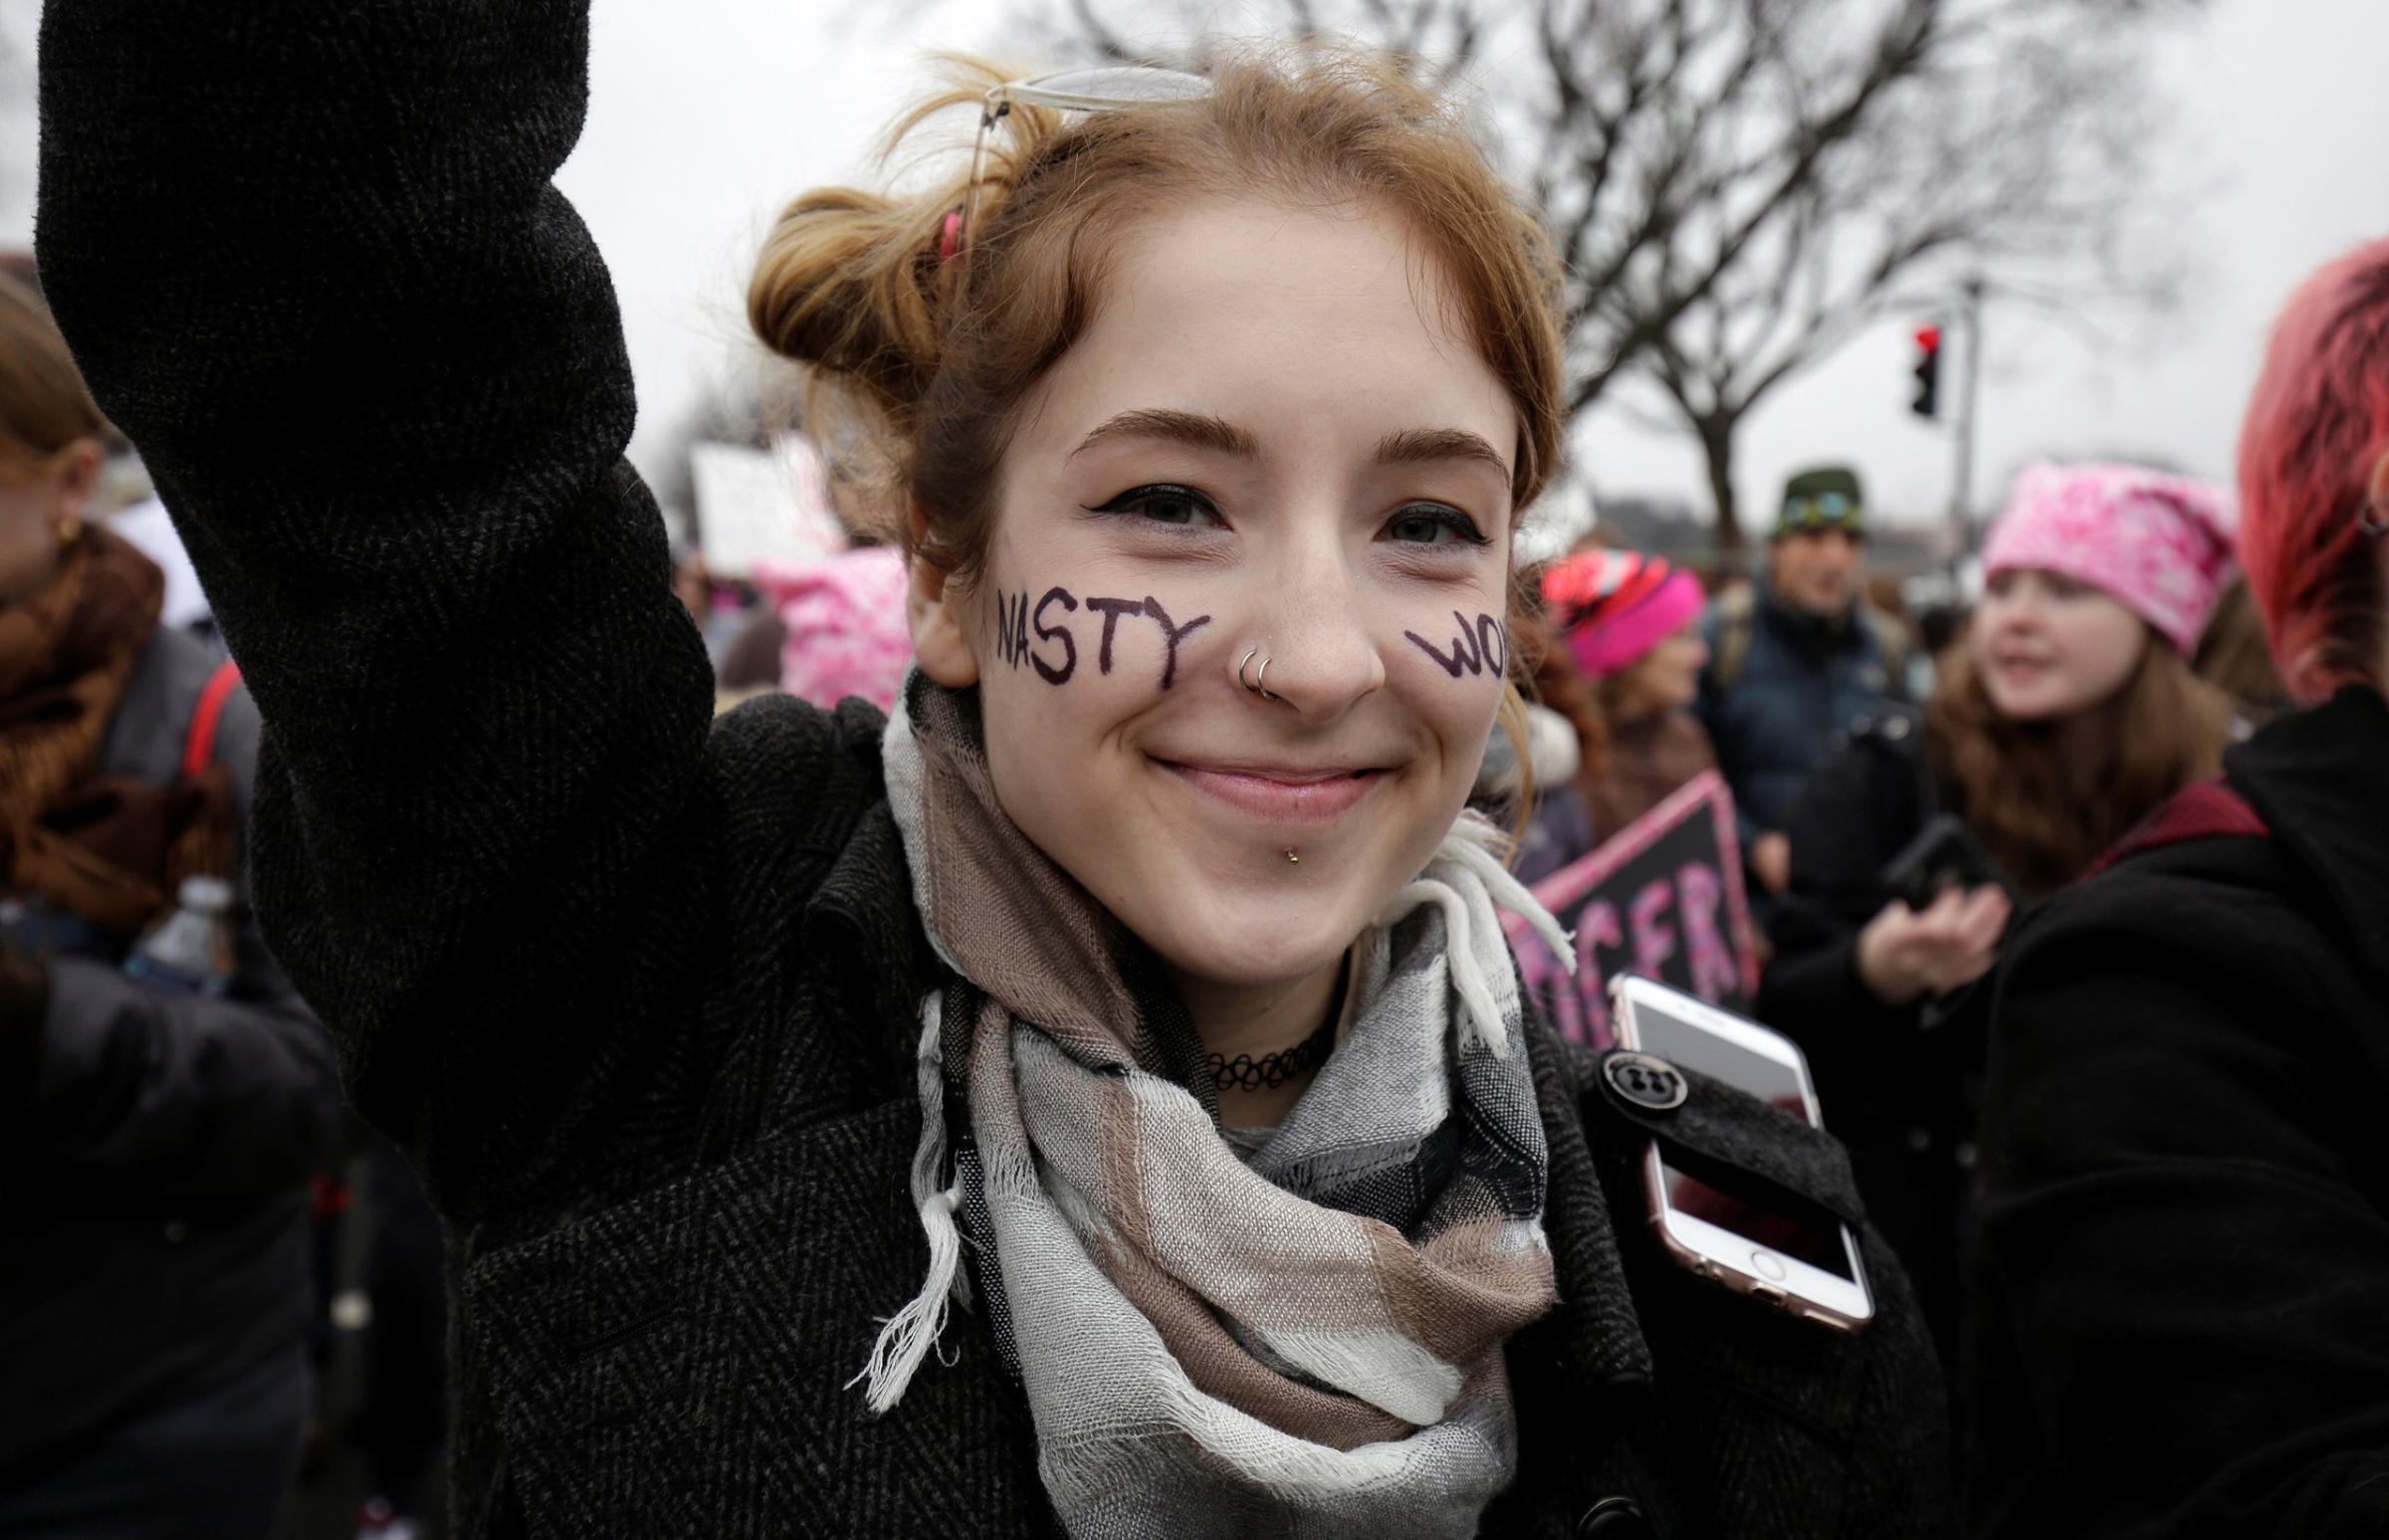 A protester wears "Nasty Woman" on her face during the Women‚Äôs March on Washington in reaction to U.S. President Donald Trump's inauguration in Washington.